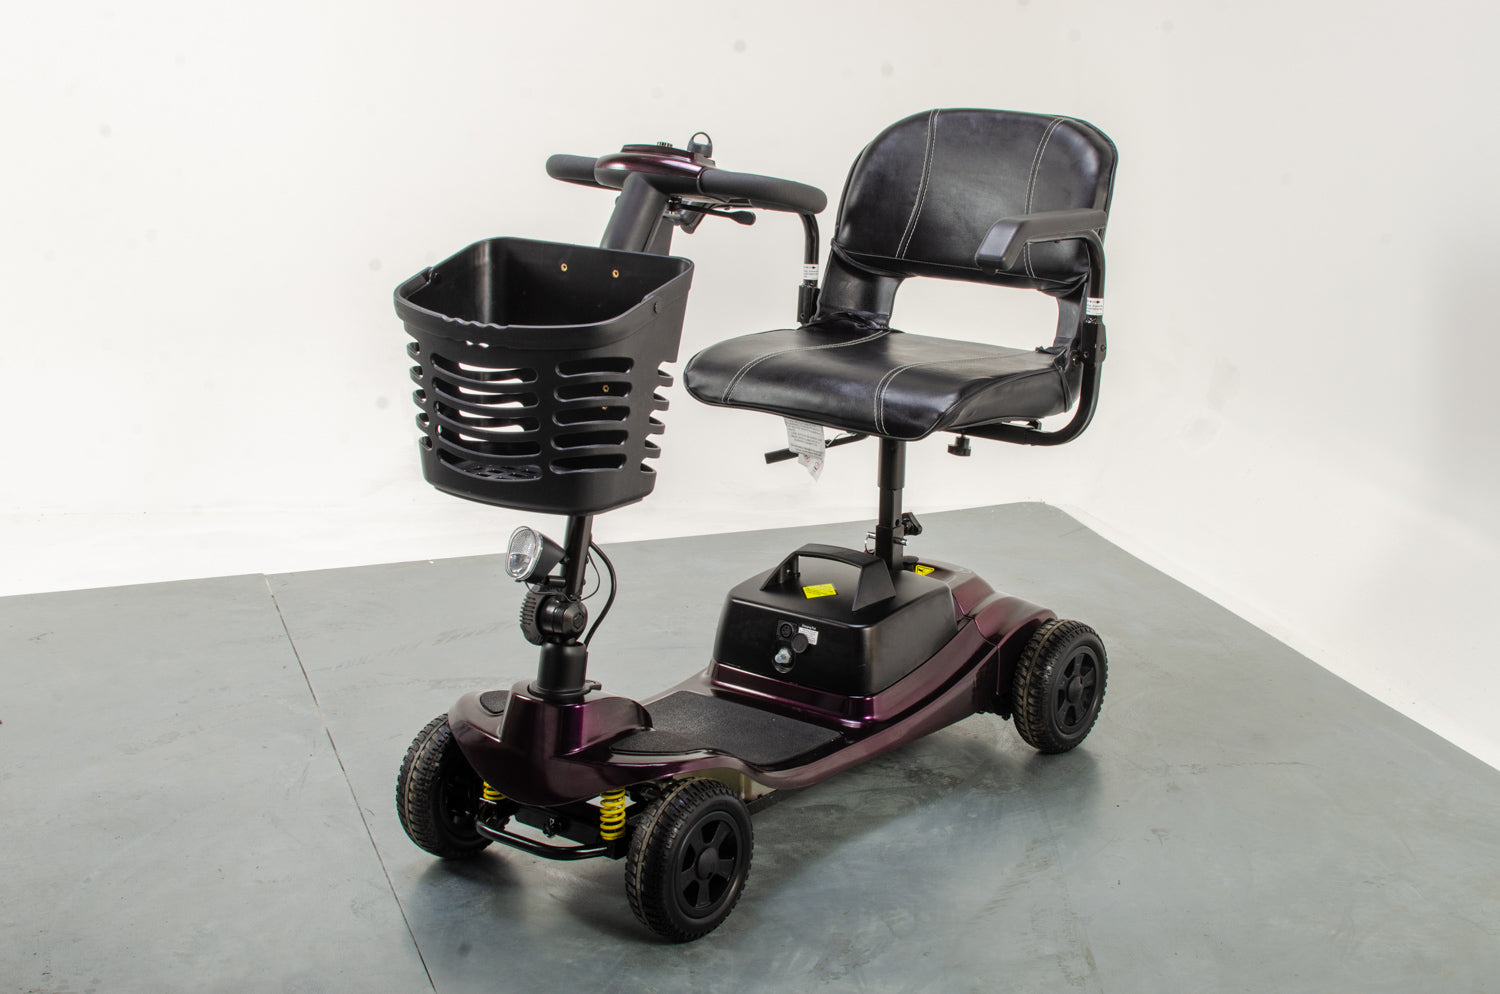 Liberty Vogue Lightweight Transportable Used Mobility Scooter Suspension Folding